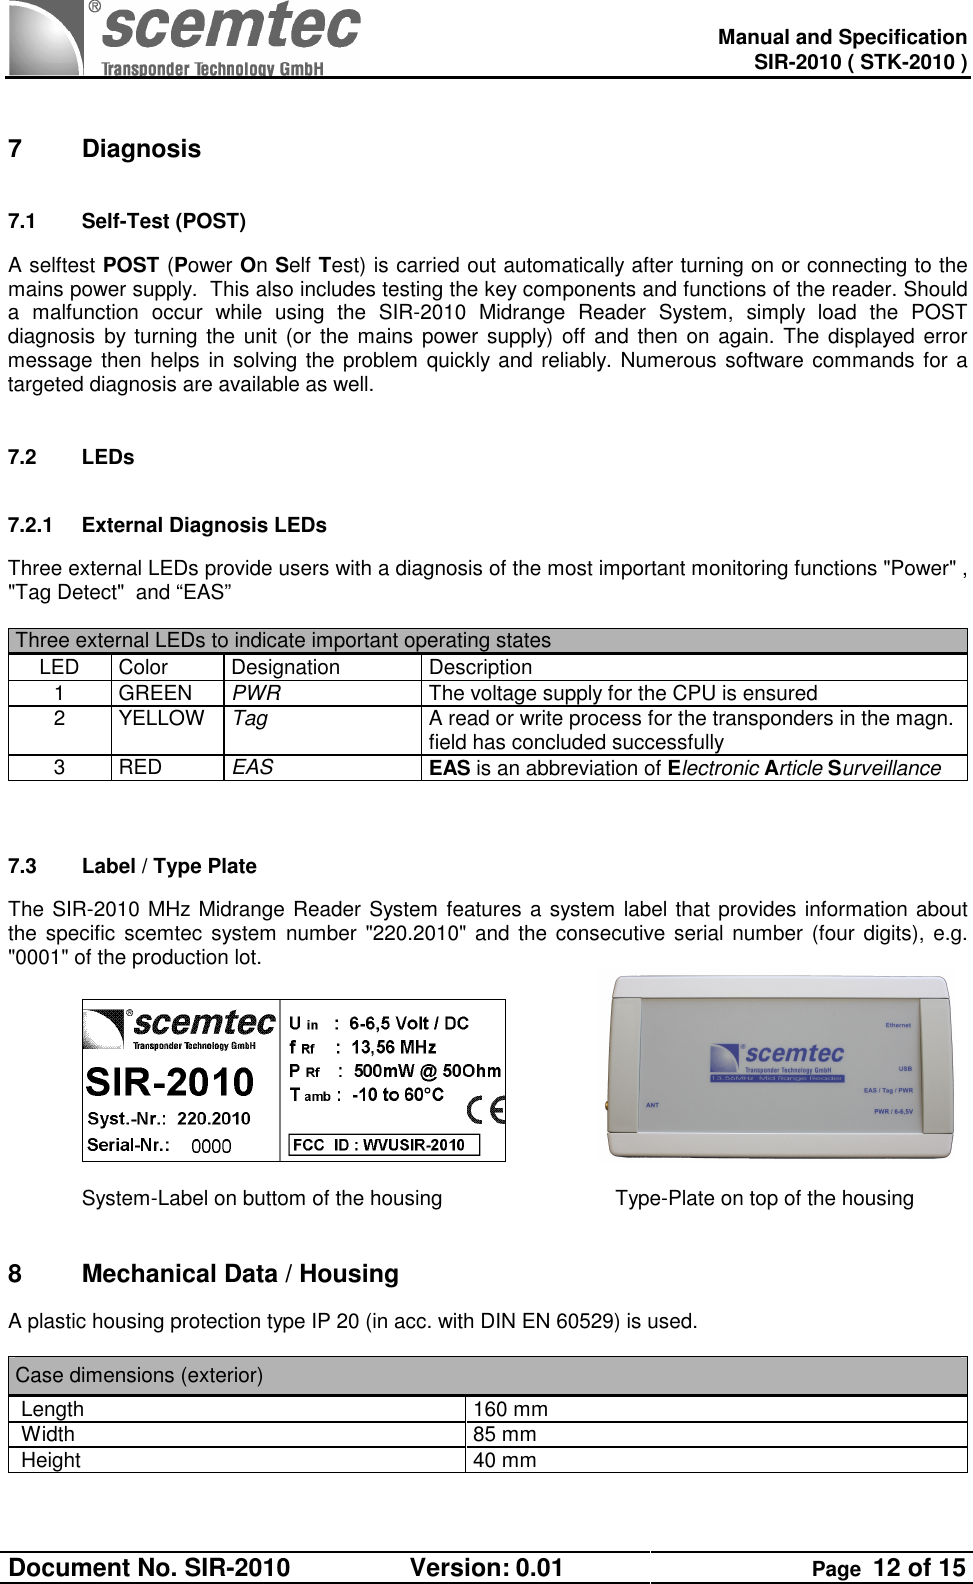   Manual and Specification SIR-2010 ( STK-2010 ) Document No. SIR-2010  Version: 0.01  Page  12 of 15   7  Diagnosis 7.1  Self-Test (POST) A selftest POST (Power On Self Test) is carried out automatically after turning on or connecting to the mains power supply.  This also includes testing the key components and functions of the reader. Should a  malfunction  occur  while  using  the  SIR-2010  Midrange  Reader  System,  simply  load  the  POST diagnosis by turning the unit (or  the mains power supply) off and  then on again. The displayed error message then helps in solving the problem quickly and reliably. Numerous software commands for a targeted diagnosis are available as well.  7.2  LEDs 7.2.1  External Diagnosis LEDs Three external LEDs provide users with a diagnosis of the most important monitoring functions &quot;Power&quot; , &quot;Tag Detect&quot;  and “EAS”  Three external LEDs to indicate important operating states  LED  Color  Designation  Description 1  GREEN  PWR   The voltage supply for the CPU is ensured 2  YELLOW  Tag   A read or write process for the transponders in the magn. field has concluded successfully 3  RED  EAS  EAS is an abbreviation of Electronic Article Surveillance   7.3  Label / Type Plate   The SIR-2010 MHz Midrange Reader System features a system label that provides information about the specific scemtec system number  &quot;220.2010&quot; and  the consecutive serial number (four digits), e.g. &quot;0001&quot; of the production lot.       System-Label on buttom of the housing        Type-Plate on top of the housing  8  Mechanical Data / Housing A plastic housing protection type IP 20 (in acc. with DIN EN 60529) is used.   Case dimensions (exterior)  Length  160 mm  Width  85 mm  Height  40 mm   